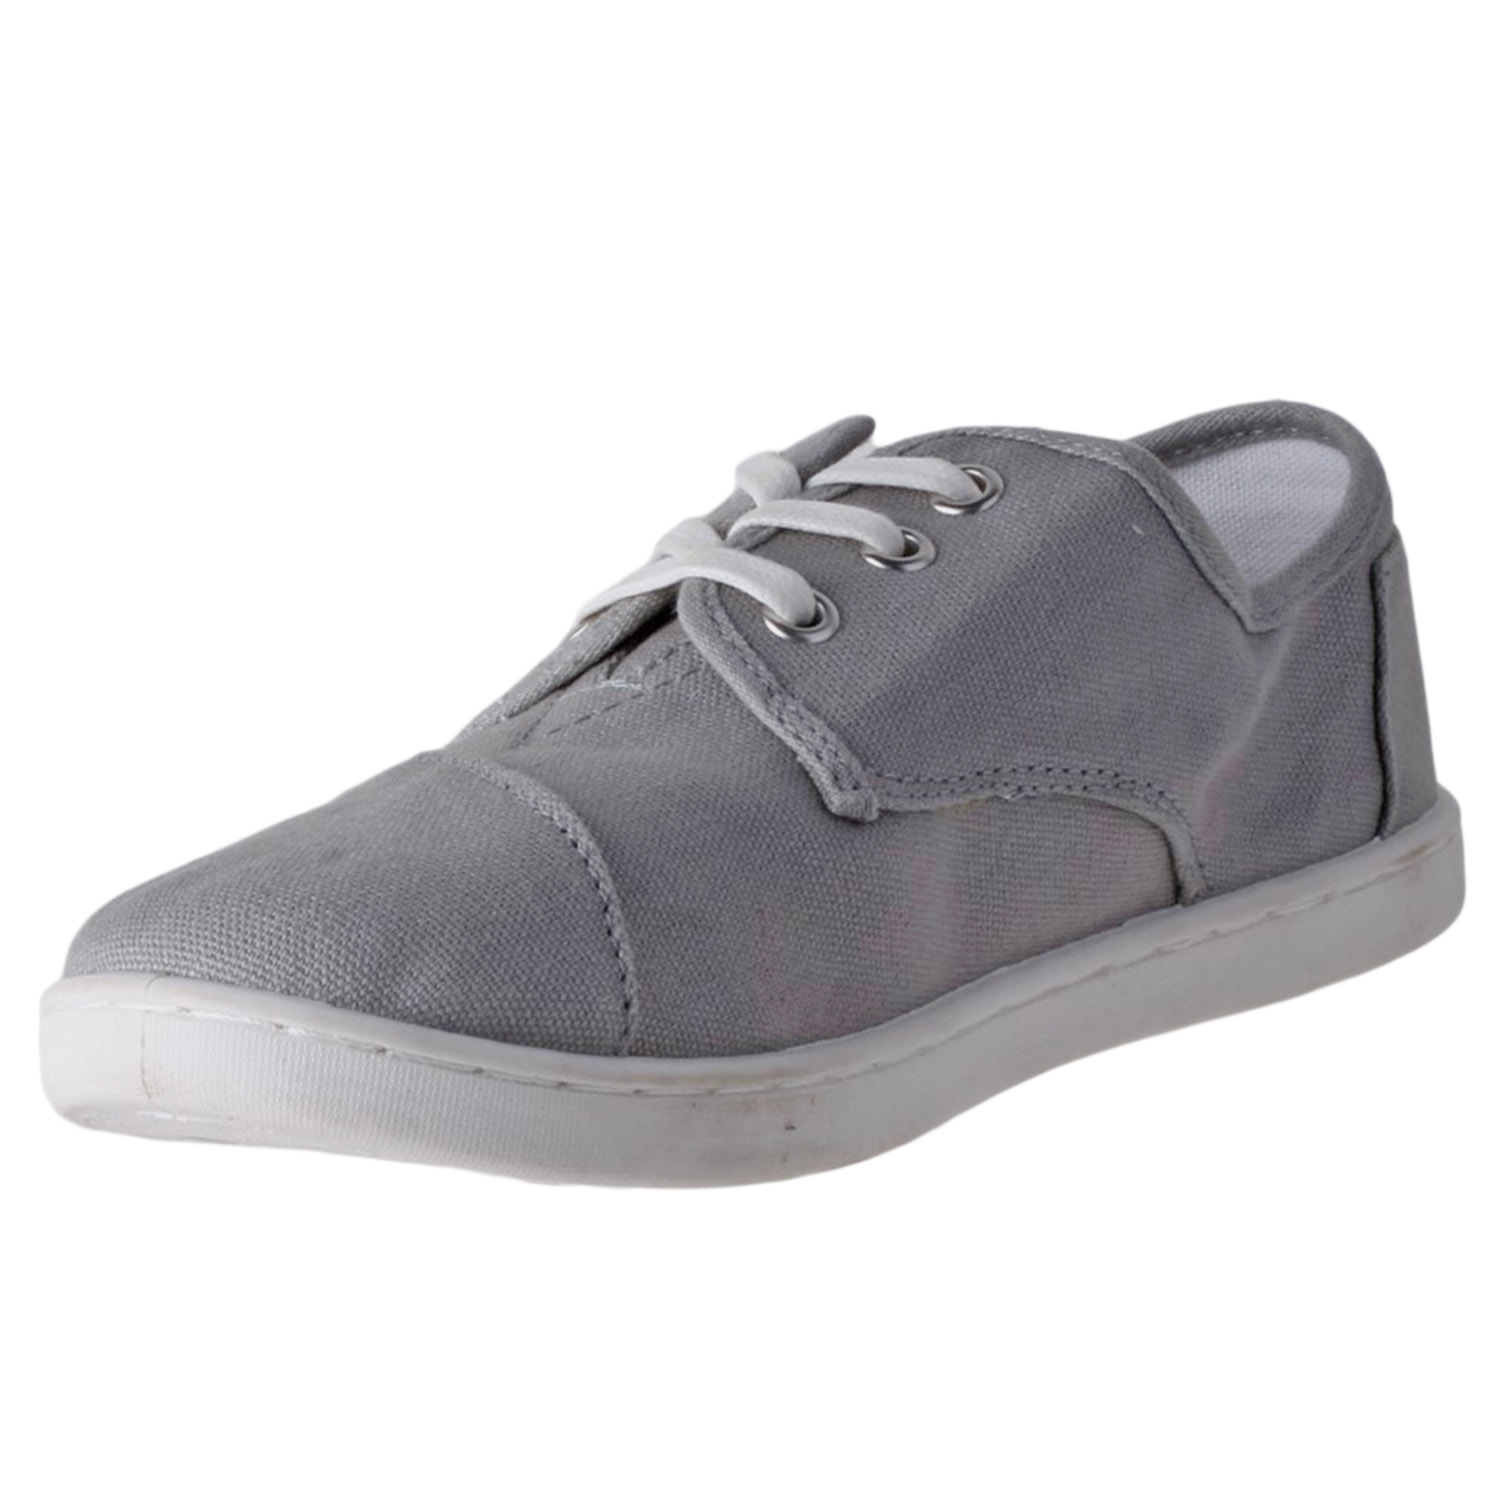 Toms Men's Paseo Sneaker Canvas Casual 